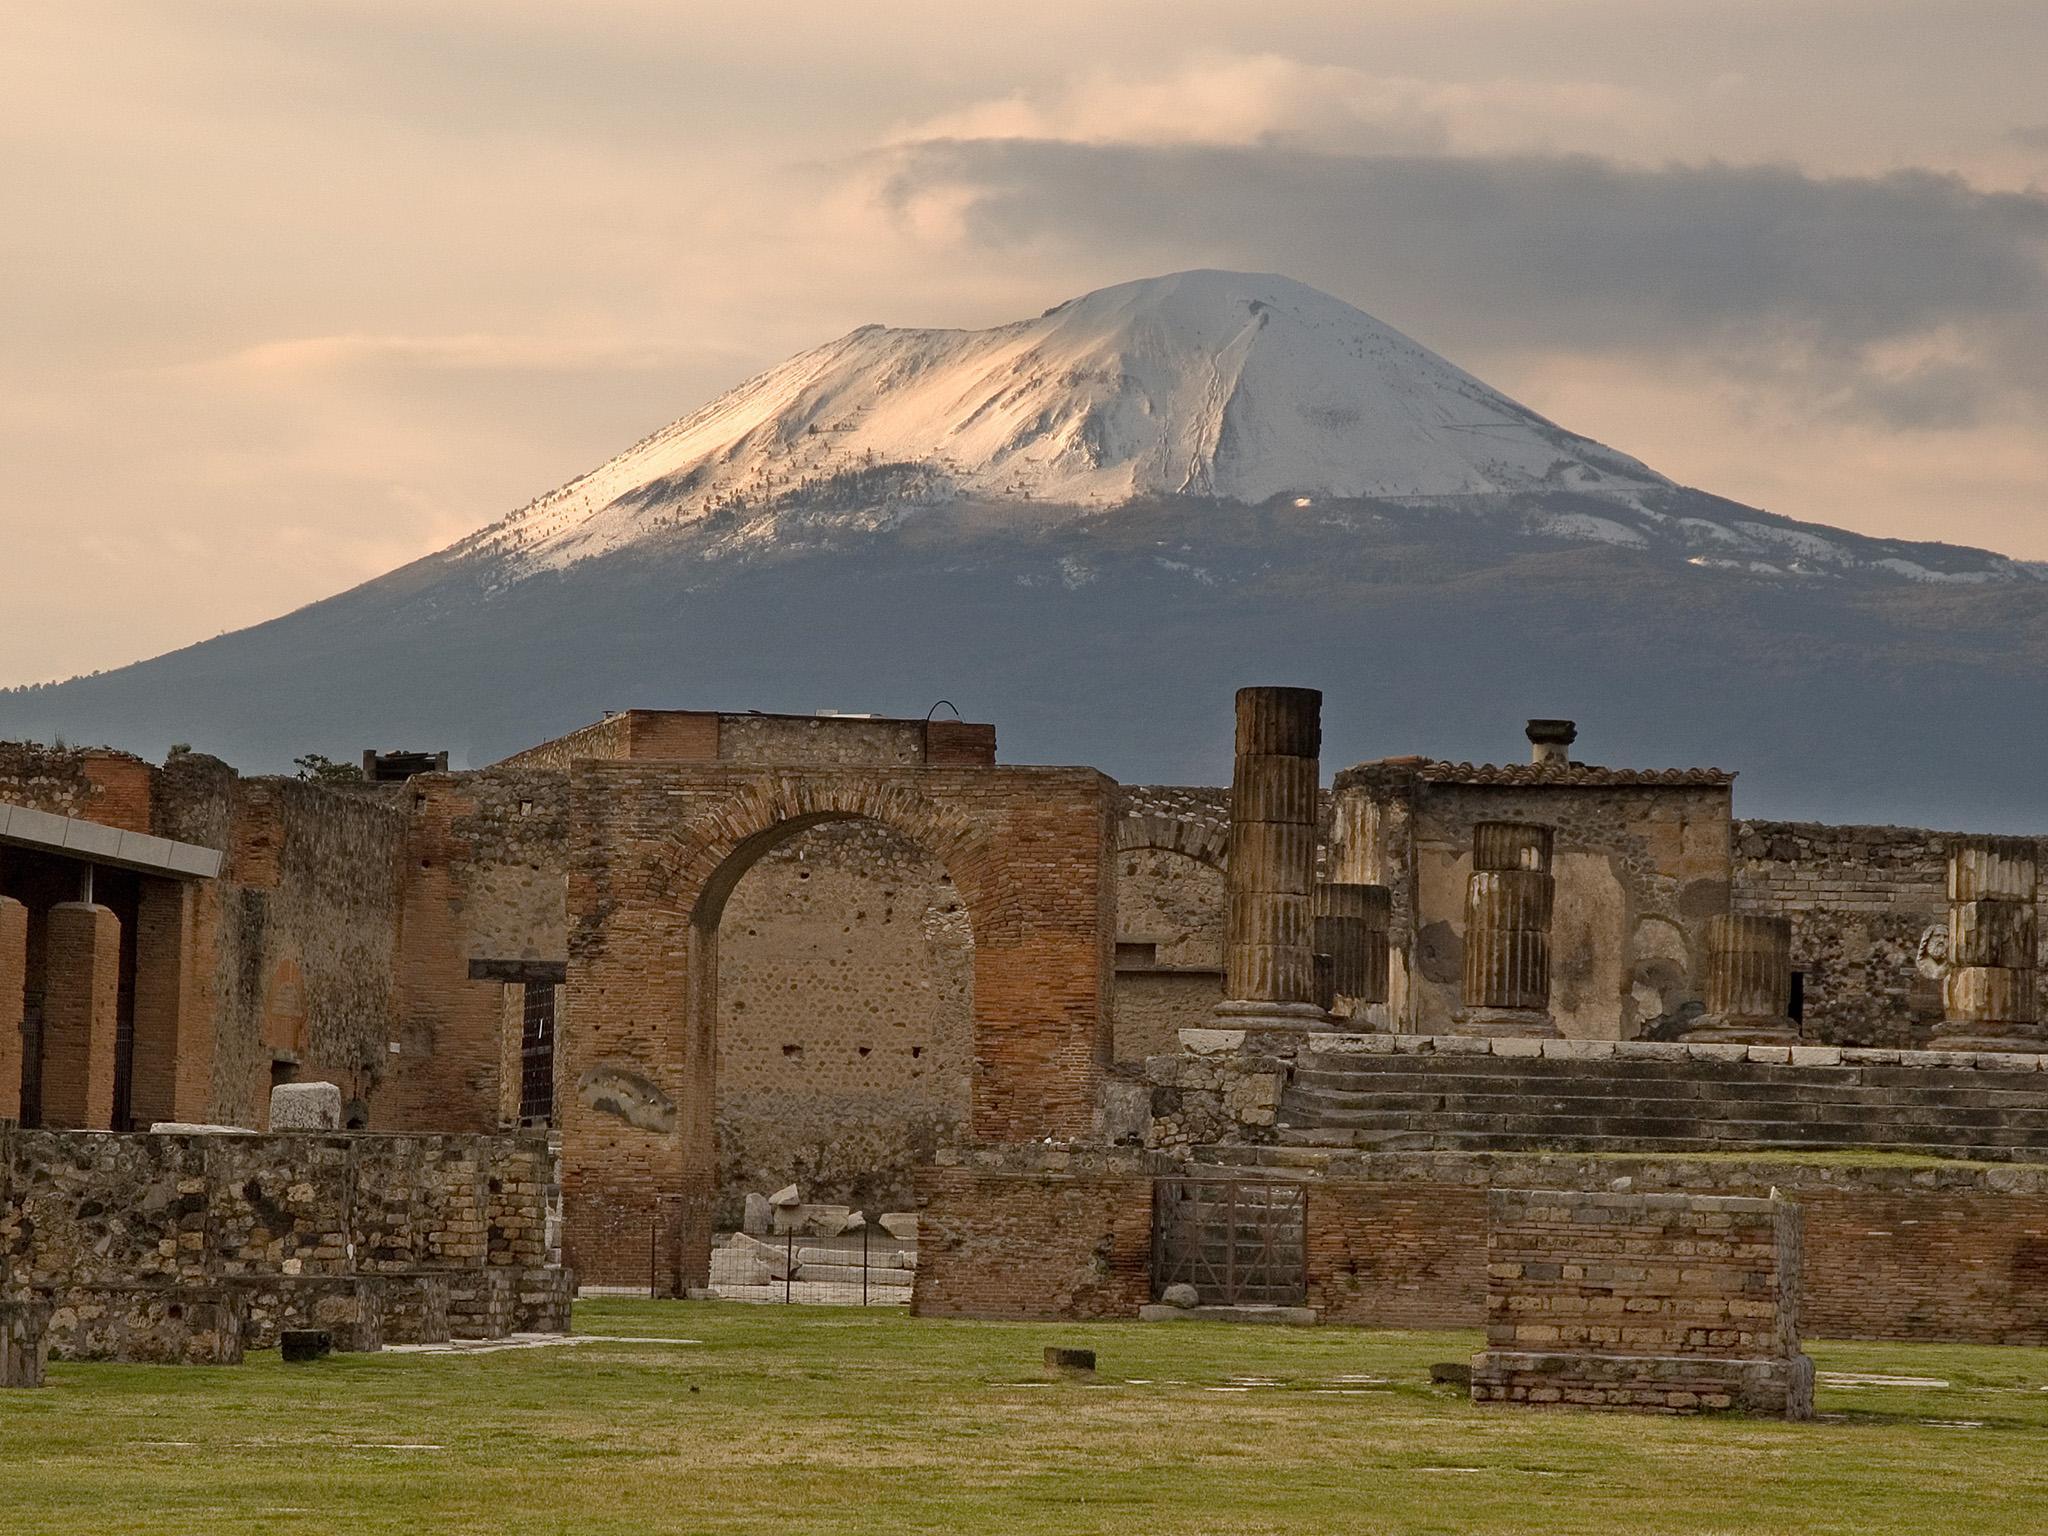 Pompeii destruction date may be wrong, archaeologists